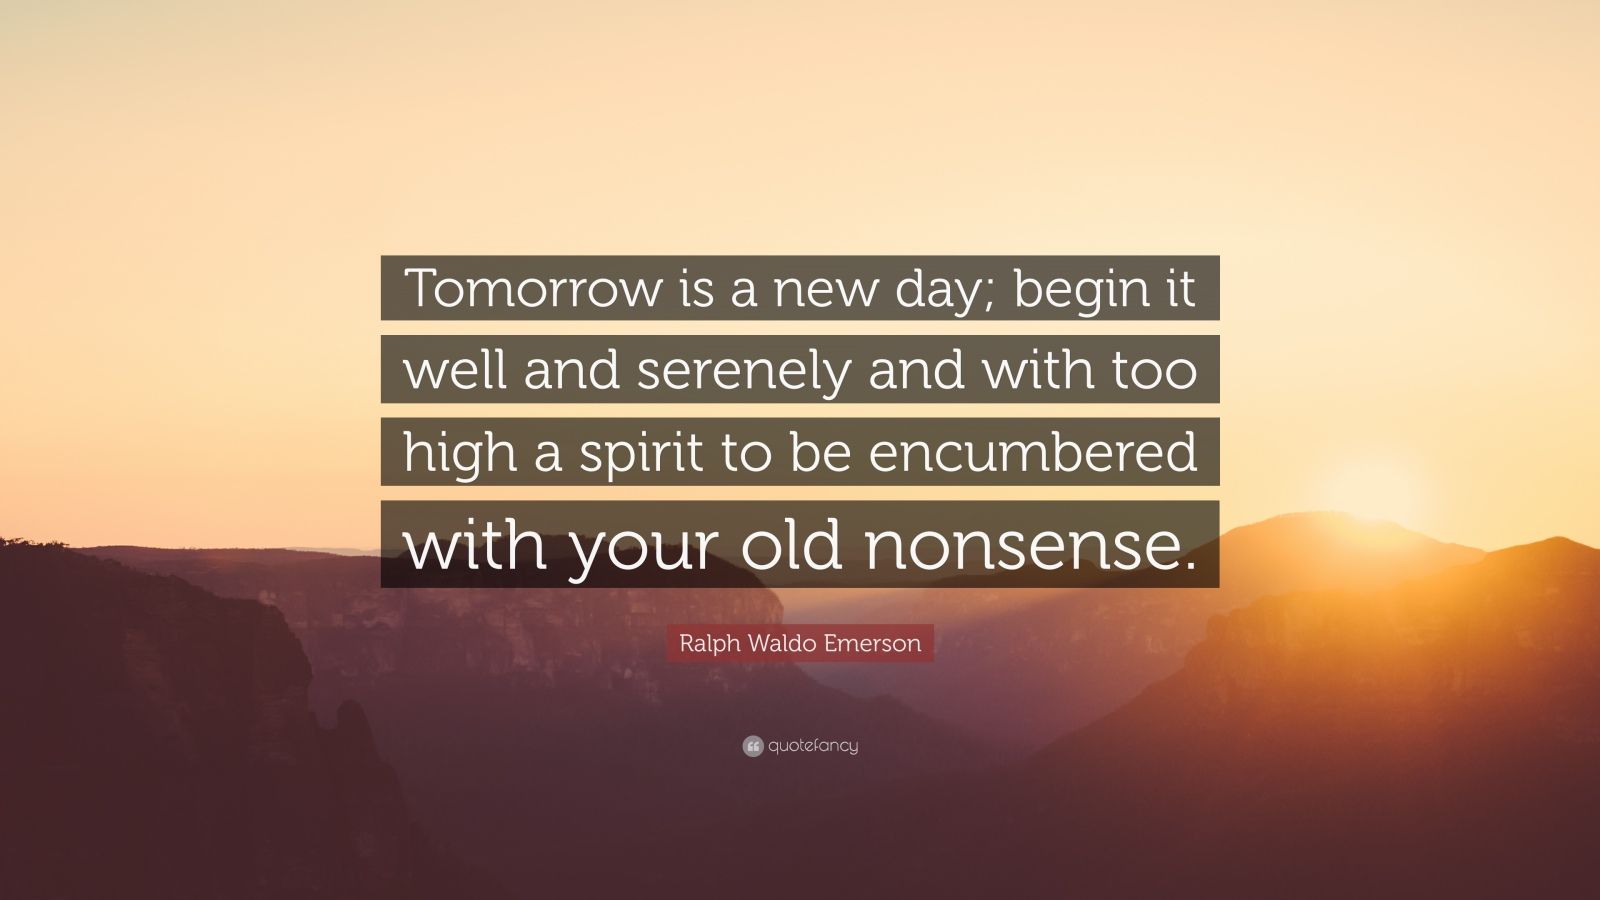 Ralph Waldo Emerson Quote “Tomorrow is a new day begin it well and